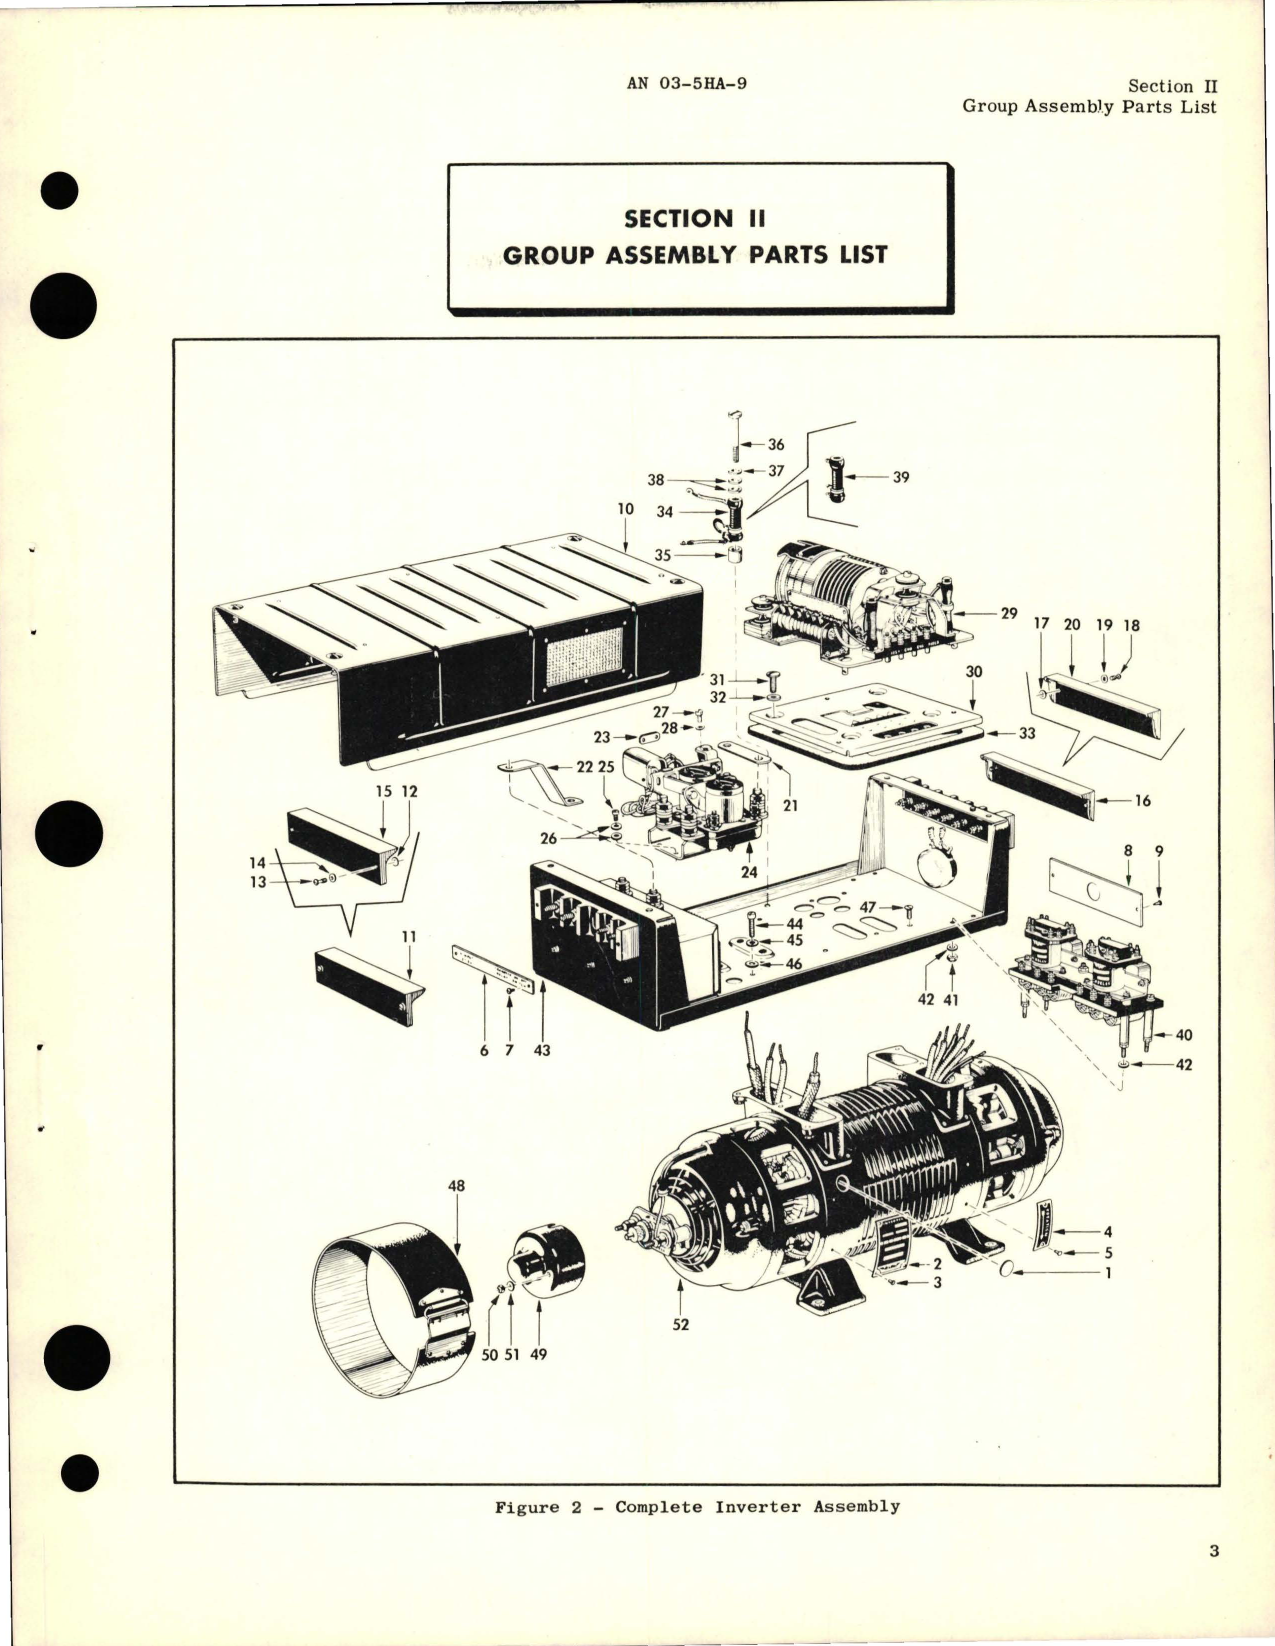 Sample page 7 from AirCorps Library document: Illustrated Parts Breakdown for Inverters - Models F45-3, F36-3, F36-3M